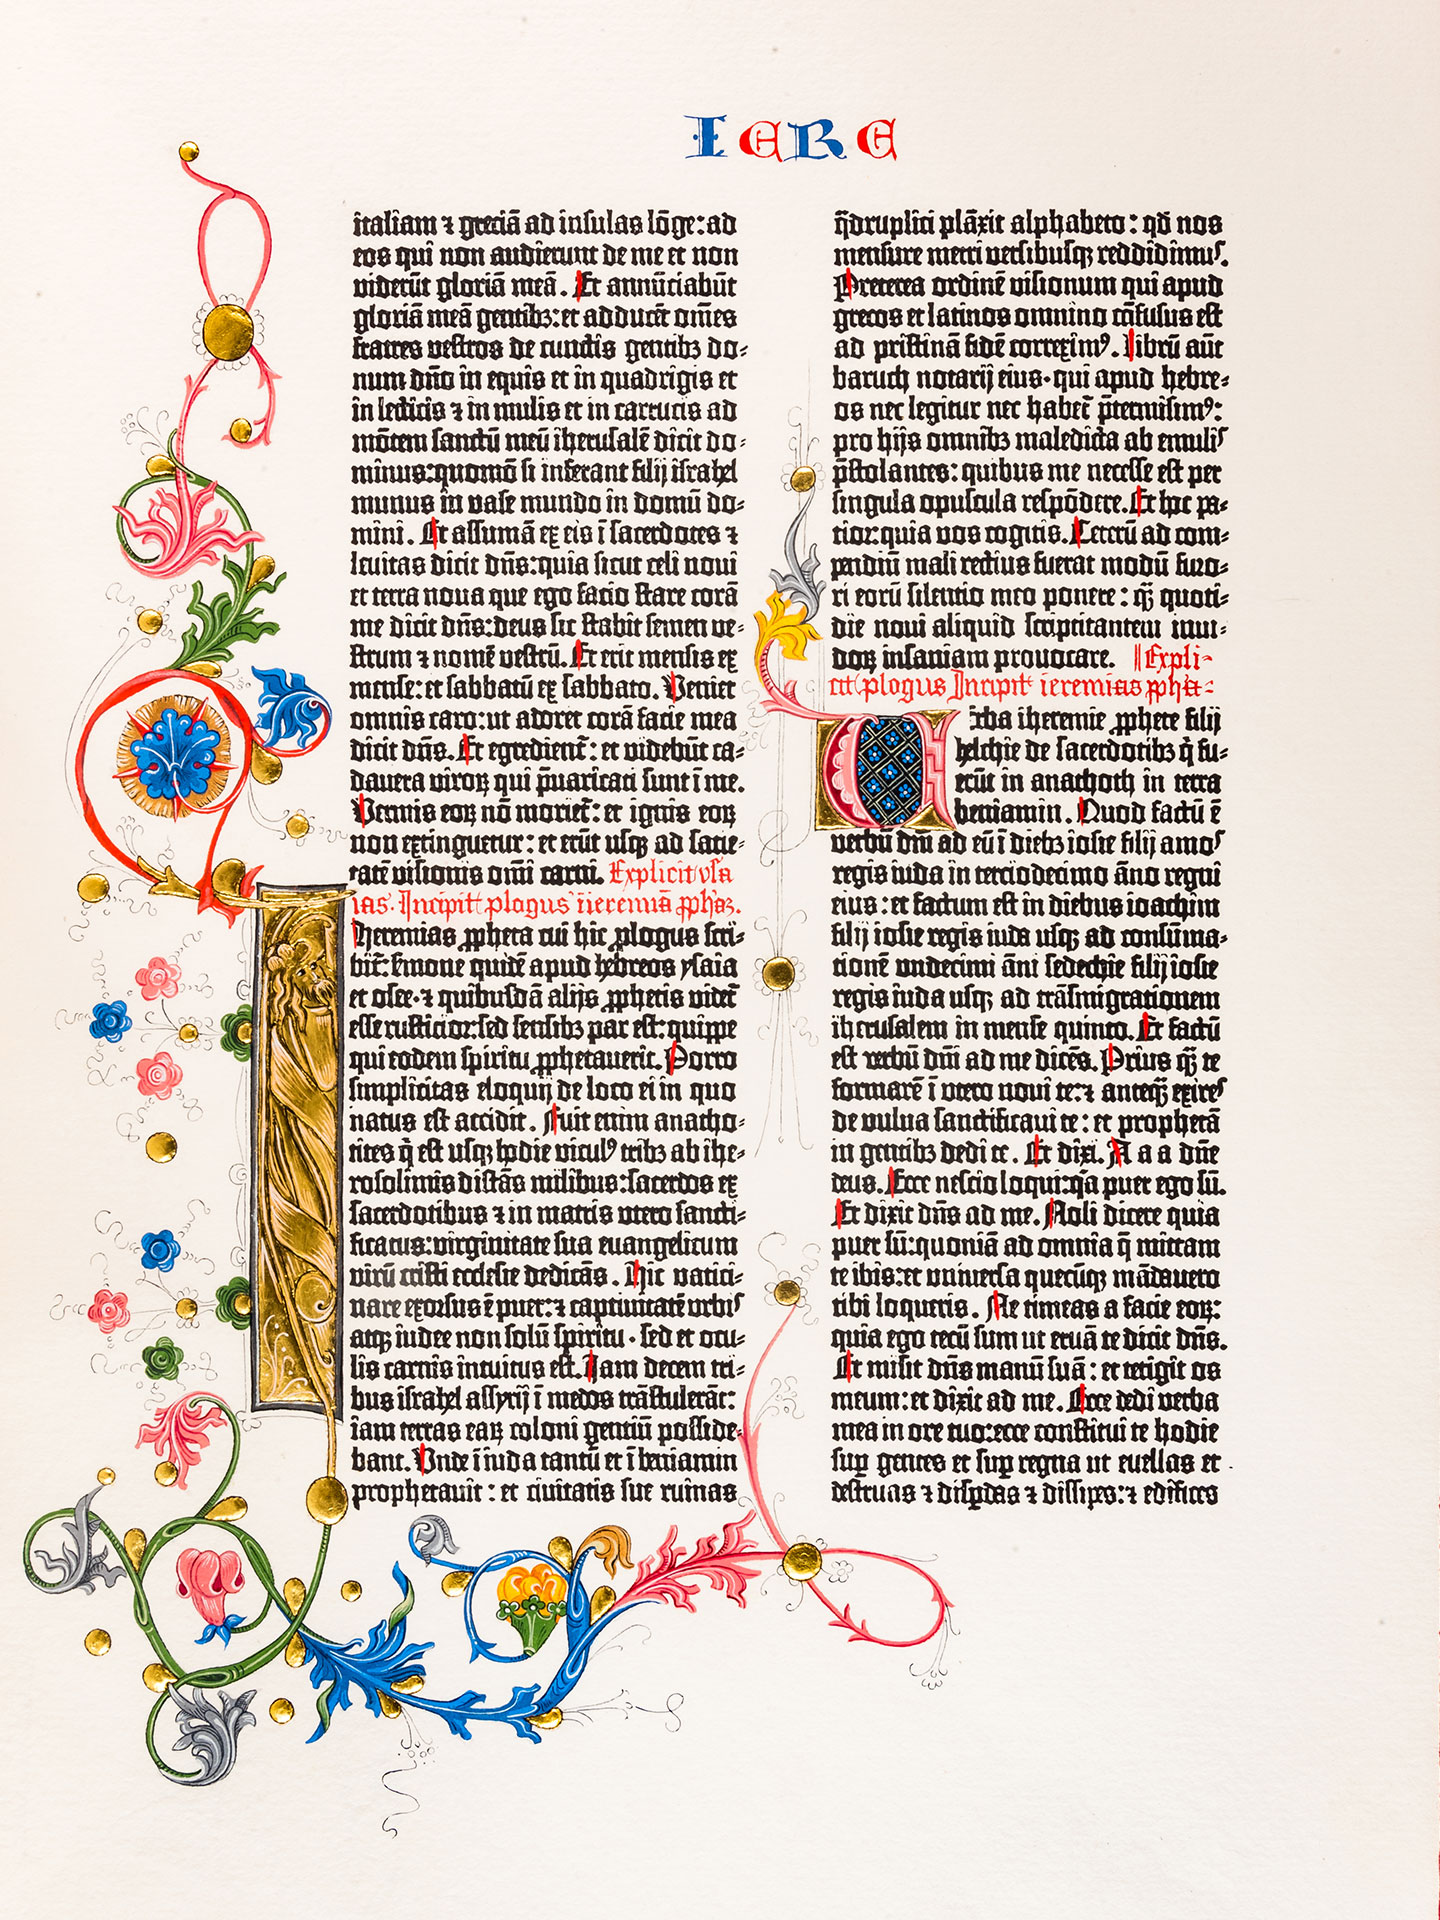 Prologue to the Book of Jeremiah. Ornamental page from the Gutenberg Bible